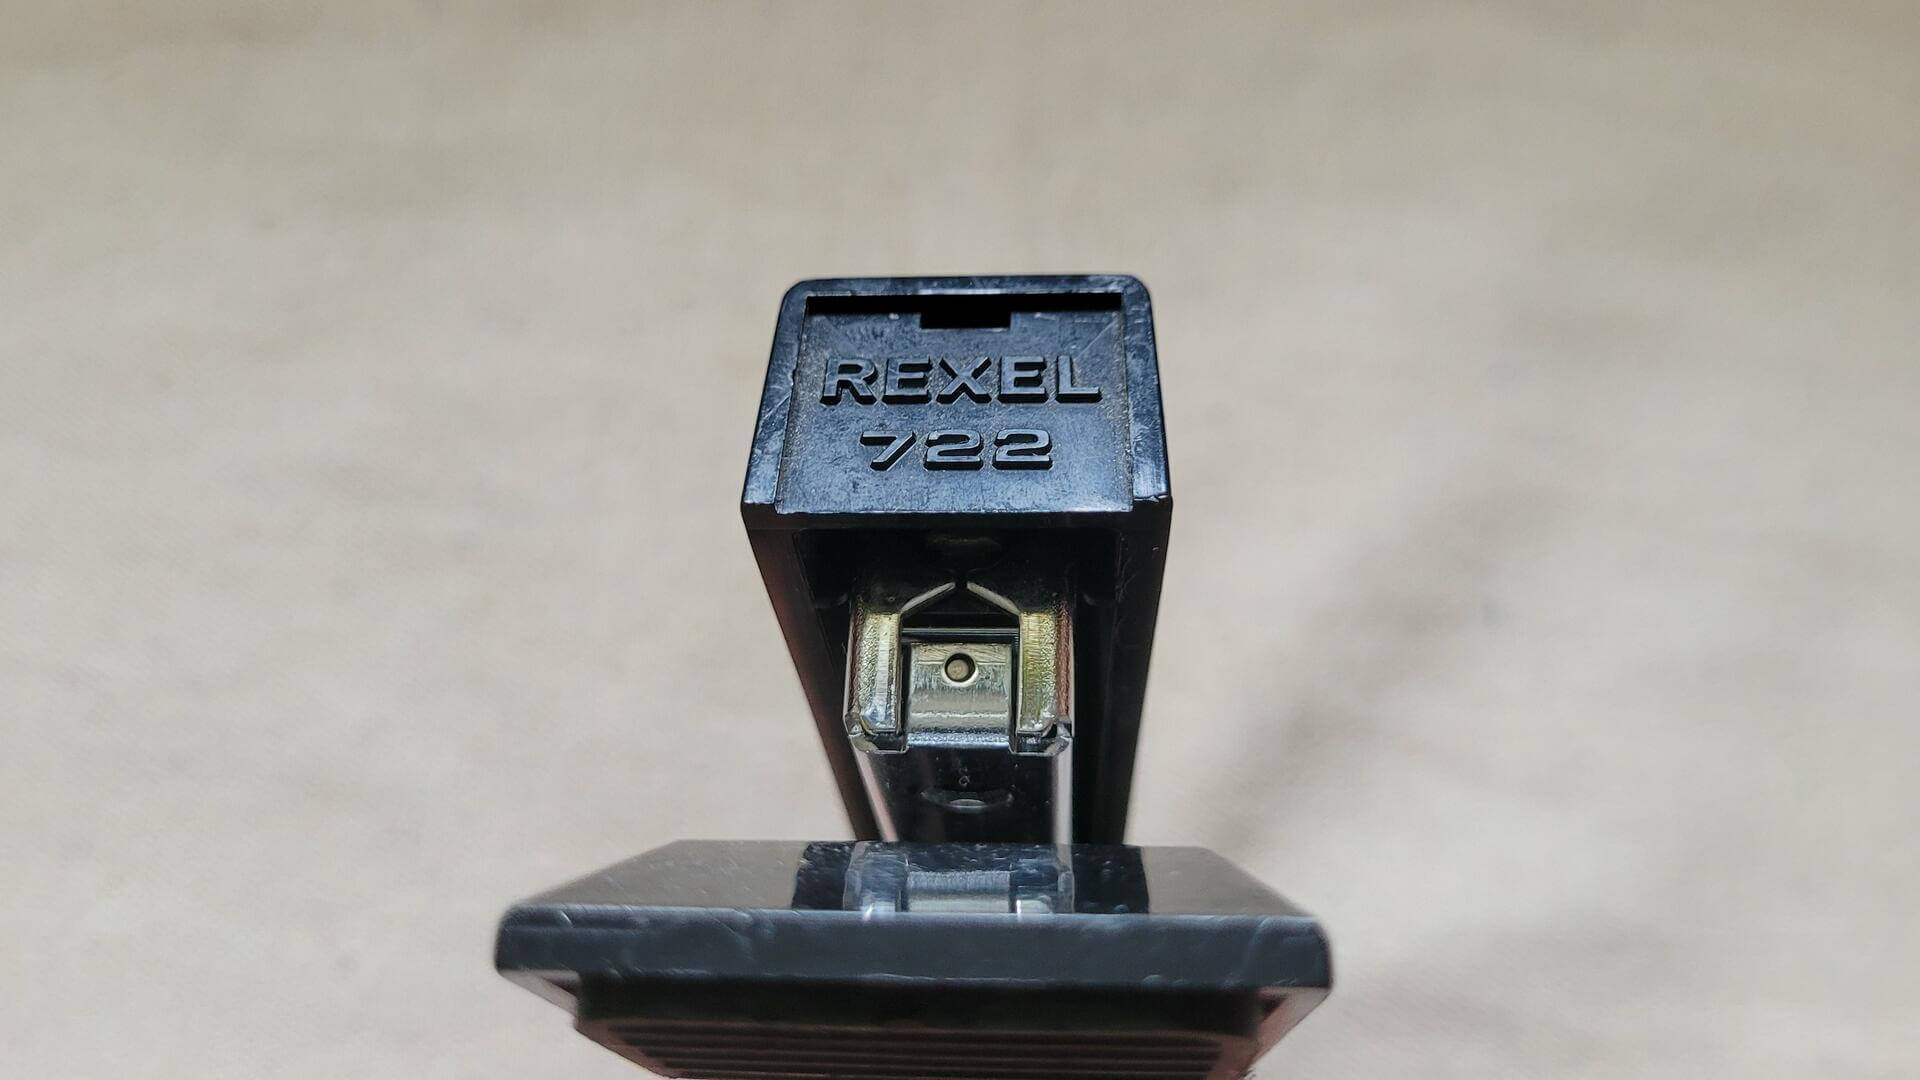 Retro Rexel Model No 722 Metal Paper Stapler Made in England - antique and vintage collectible office equipment and tools